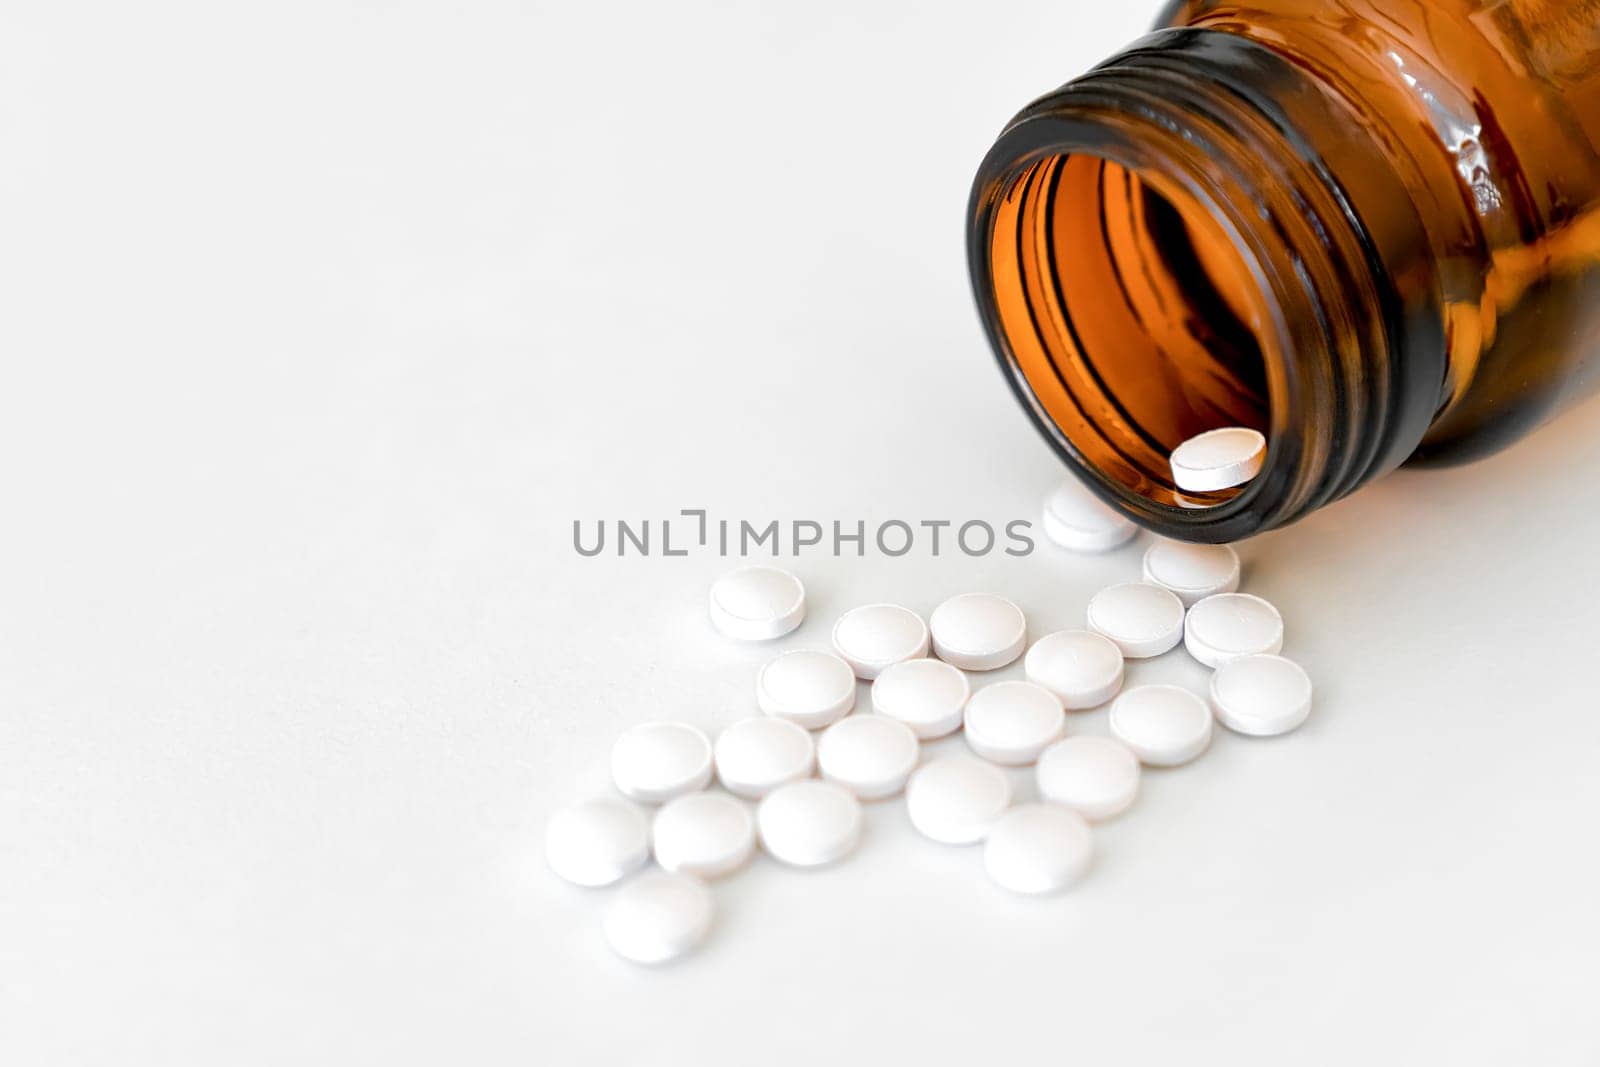 Medication Close-Up: White Pills and Brown Glass Vial Arranged on Table, Copy Space, Close-Up, Healthcare Concept. by Laguna781